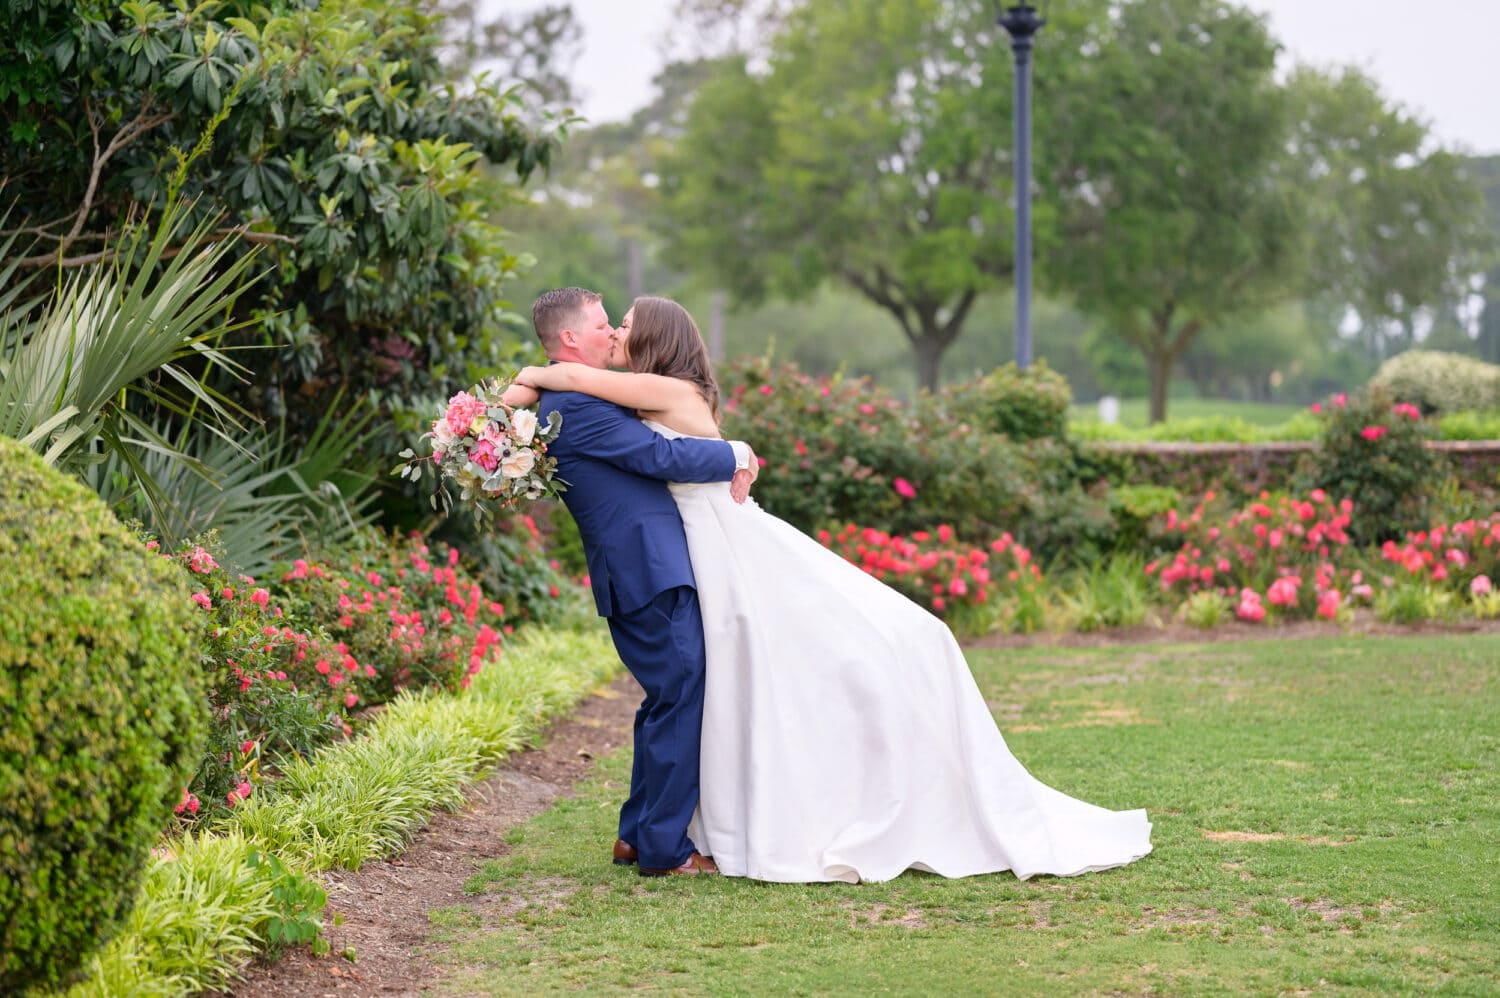 Lifting bride up for a kiss by the flowers - Pine Lakes Country Club